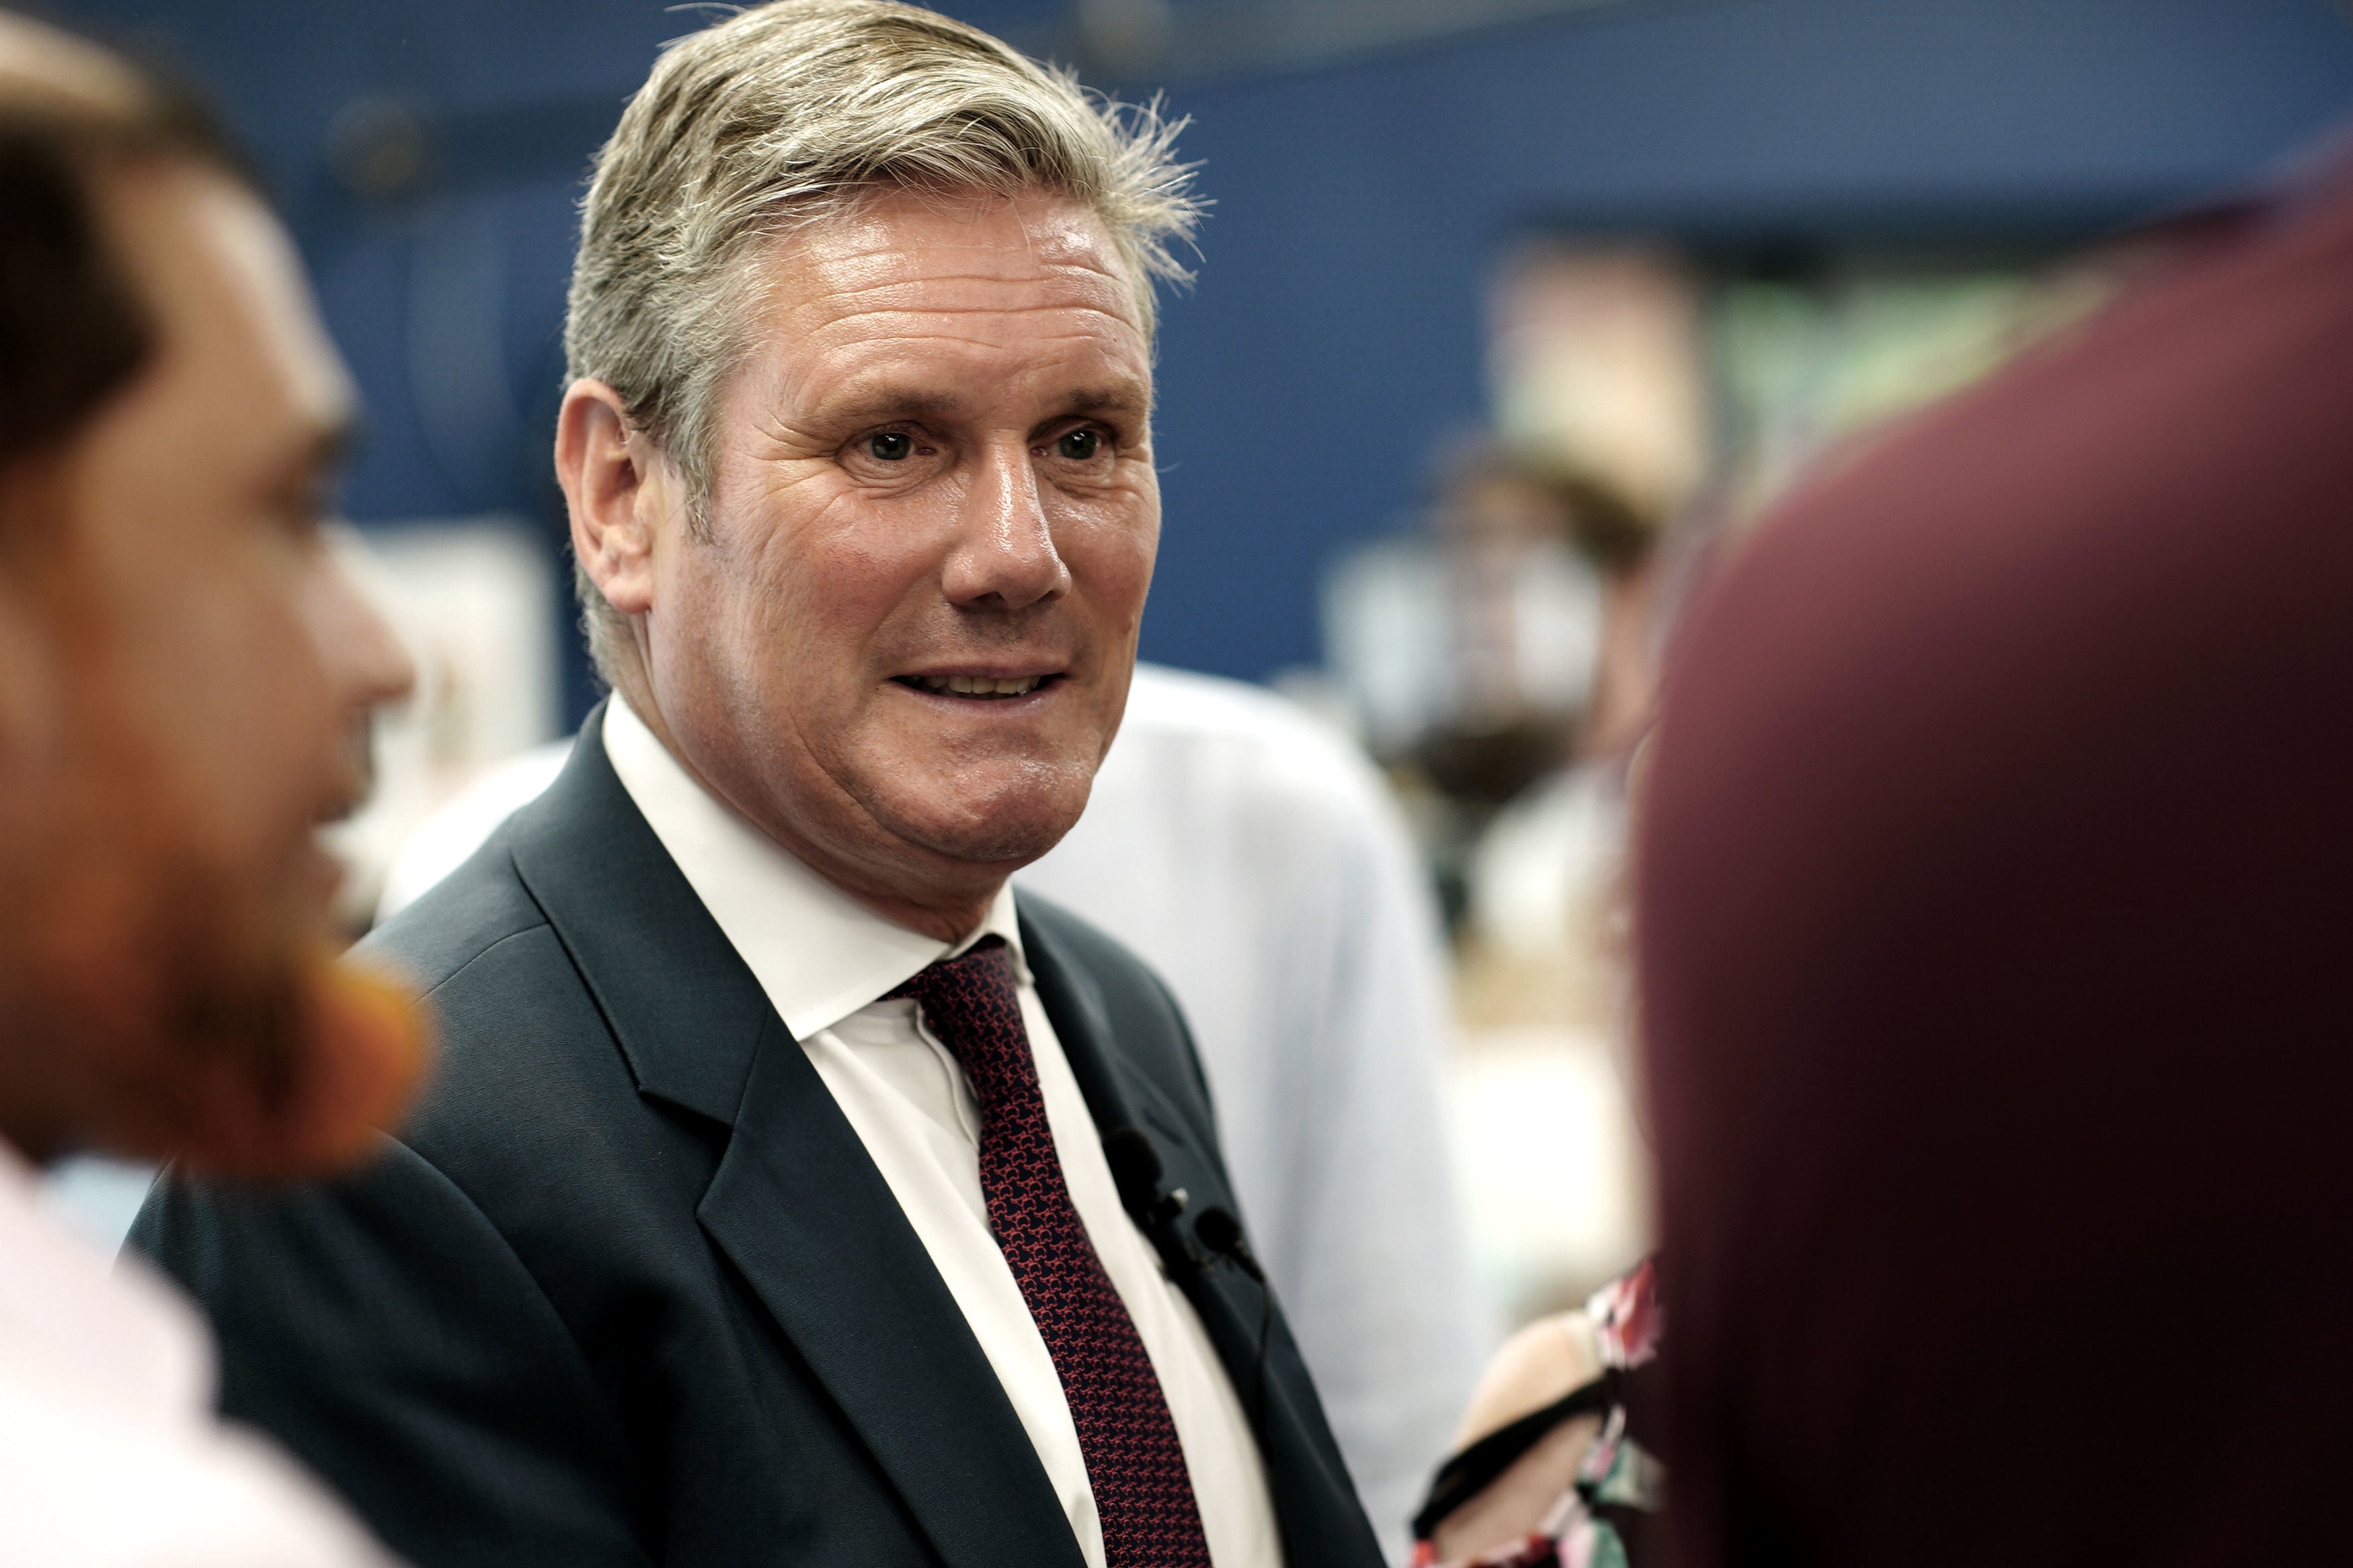 Keir Starmer has observed Truss’s sharp practice and learned